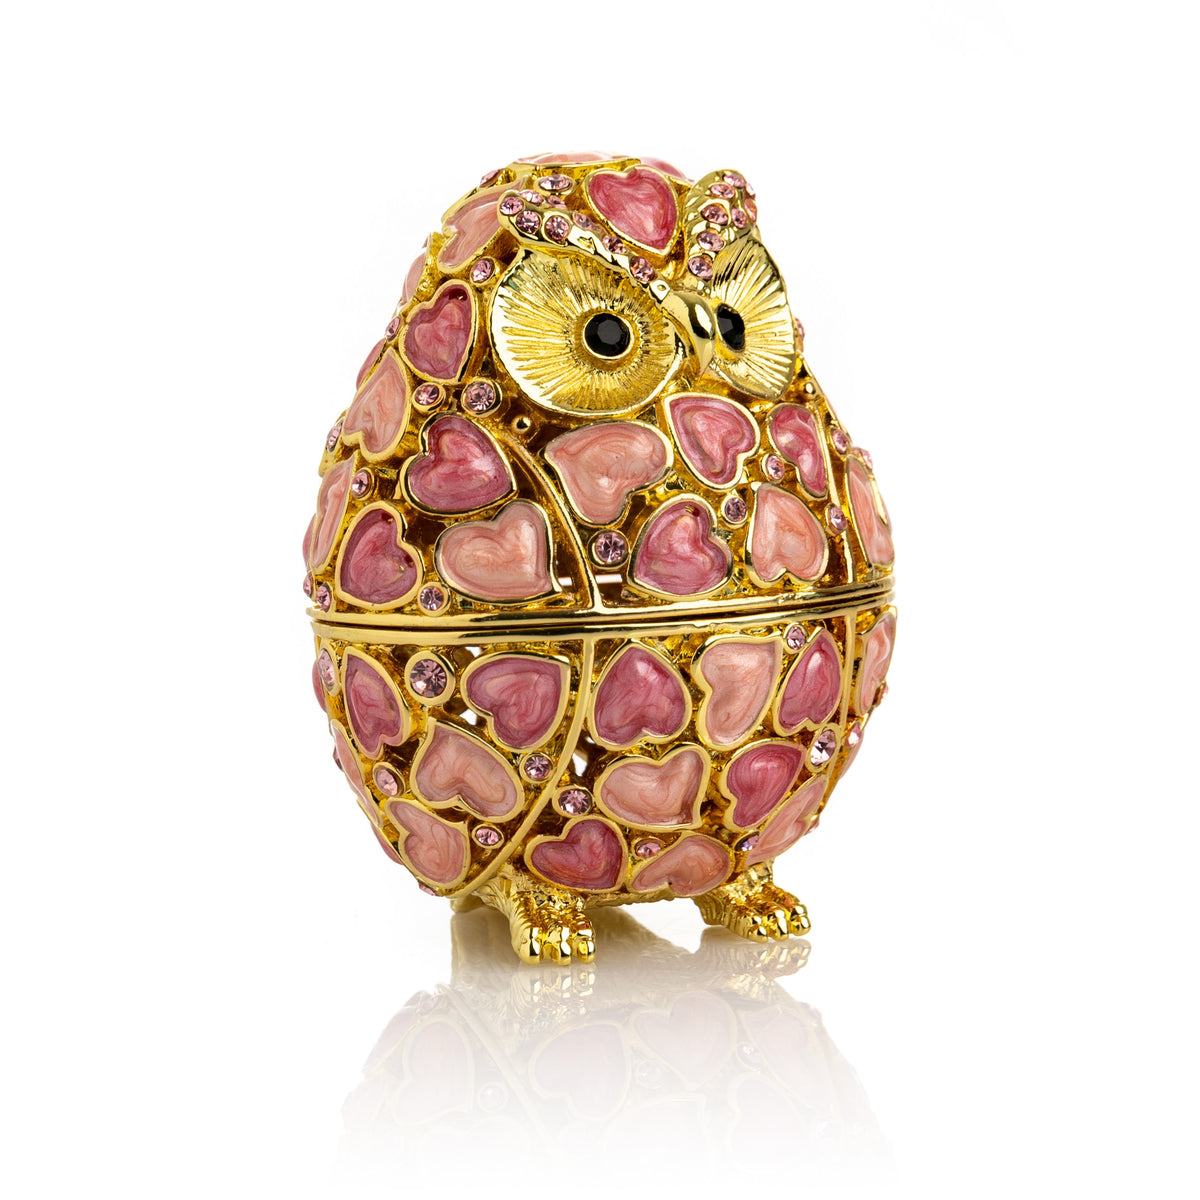 Golden Owl with Hearts